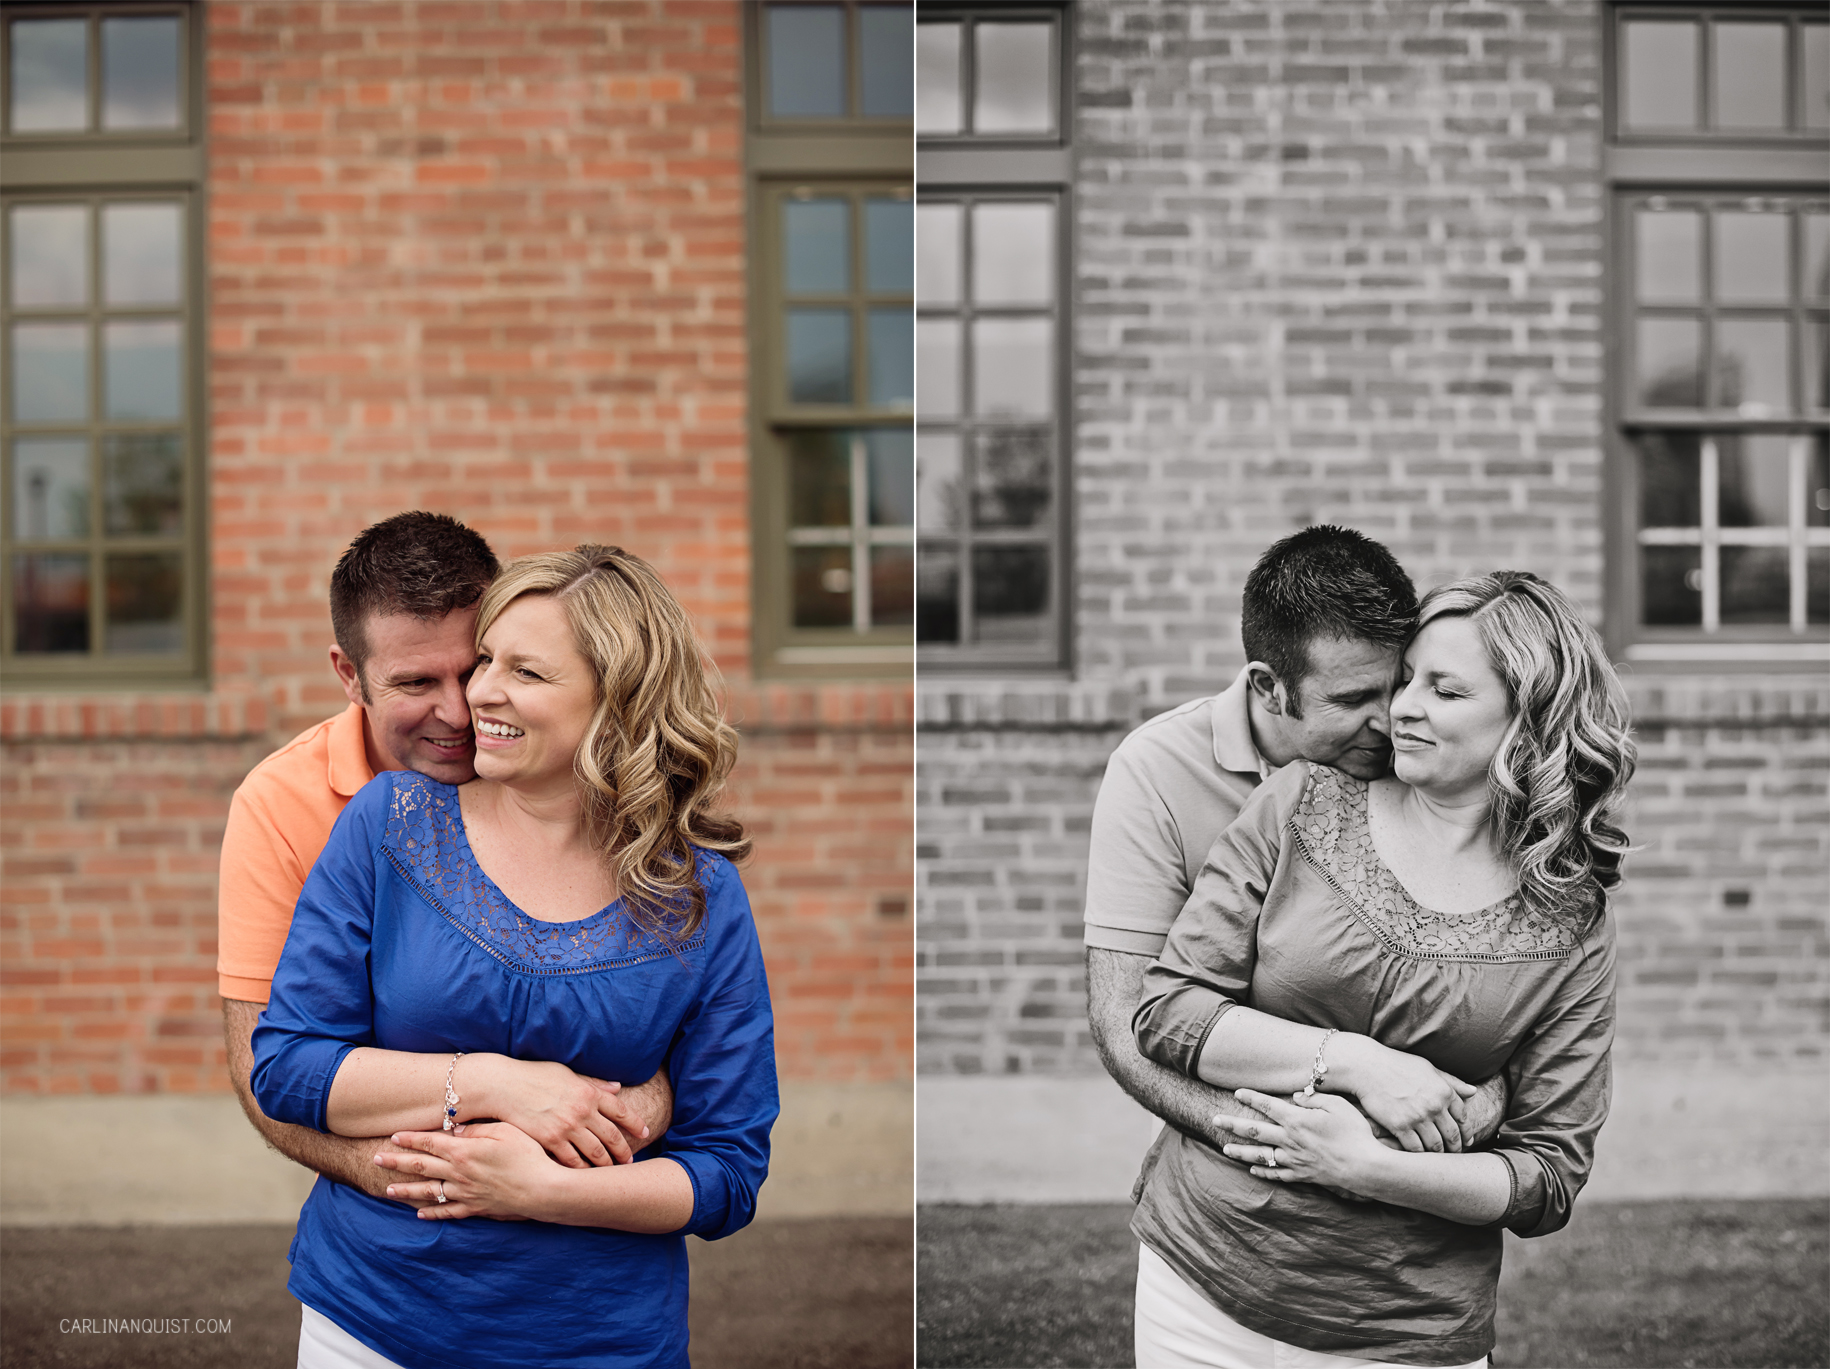  East Village Engagement Photographer | Carlin Anquist Photography